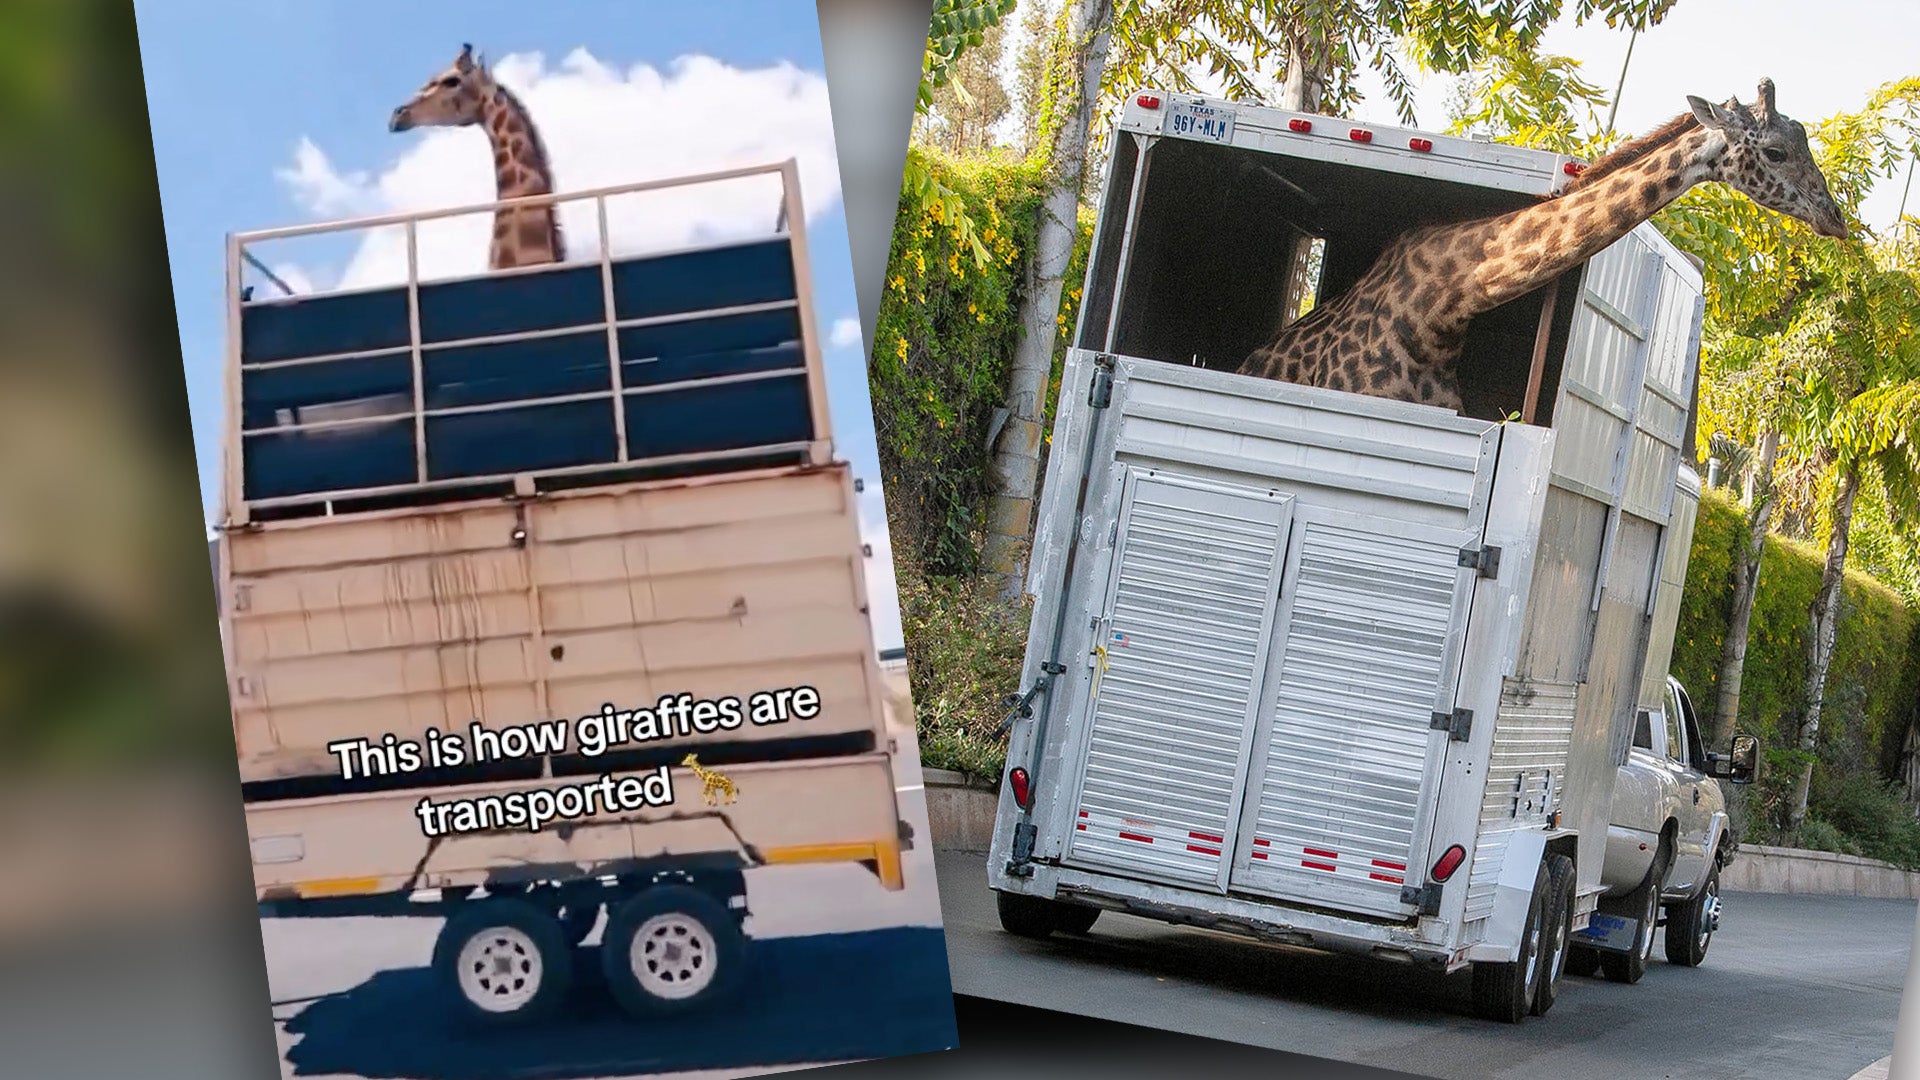 Moving giraffes is just as weird and dangerous as you’d think.